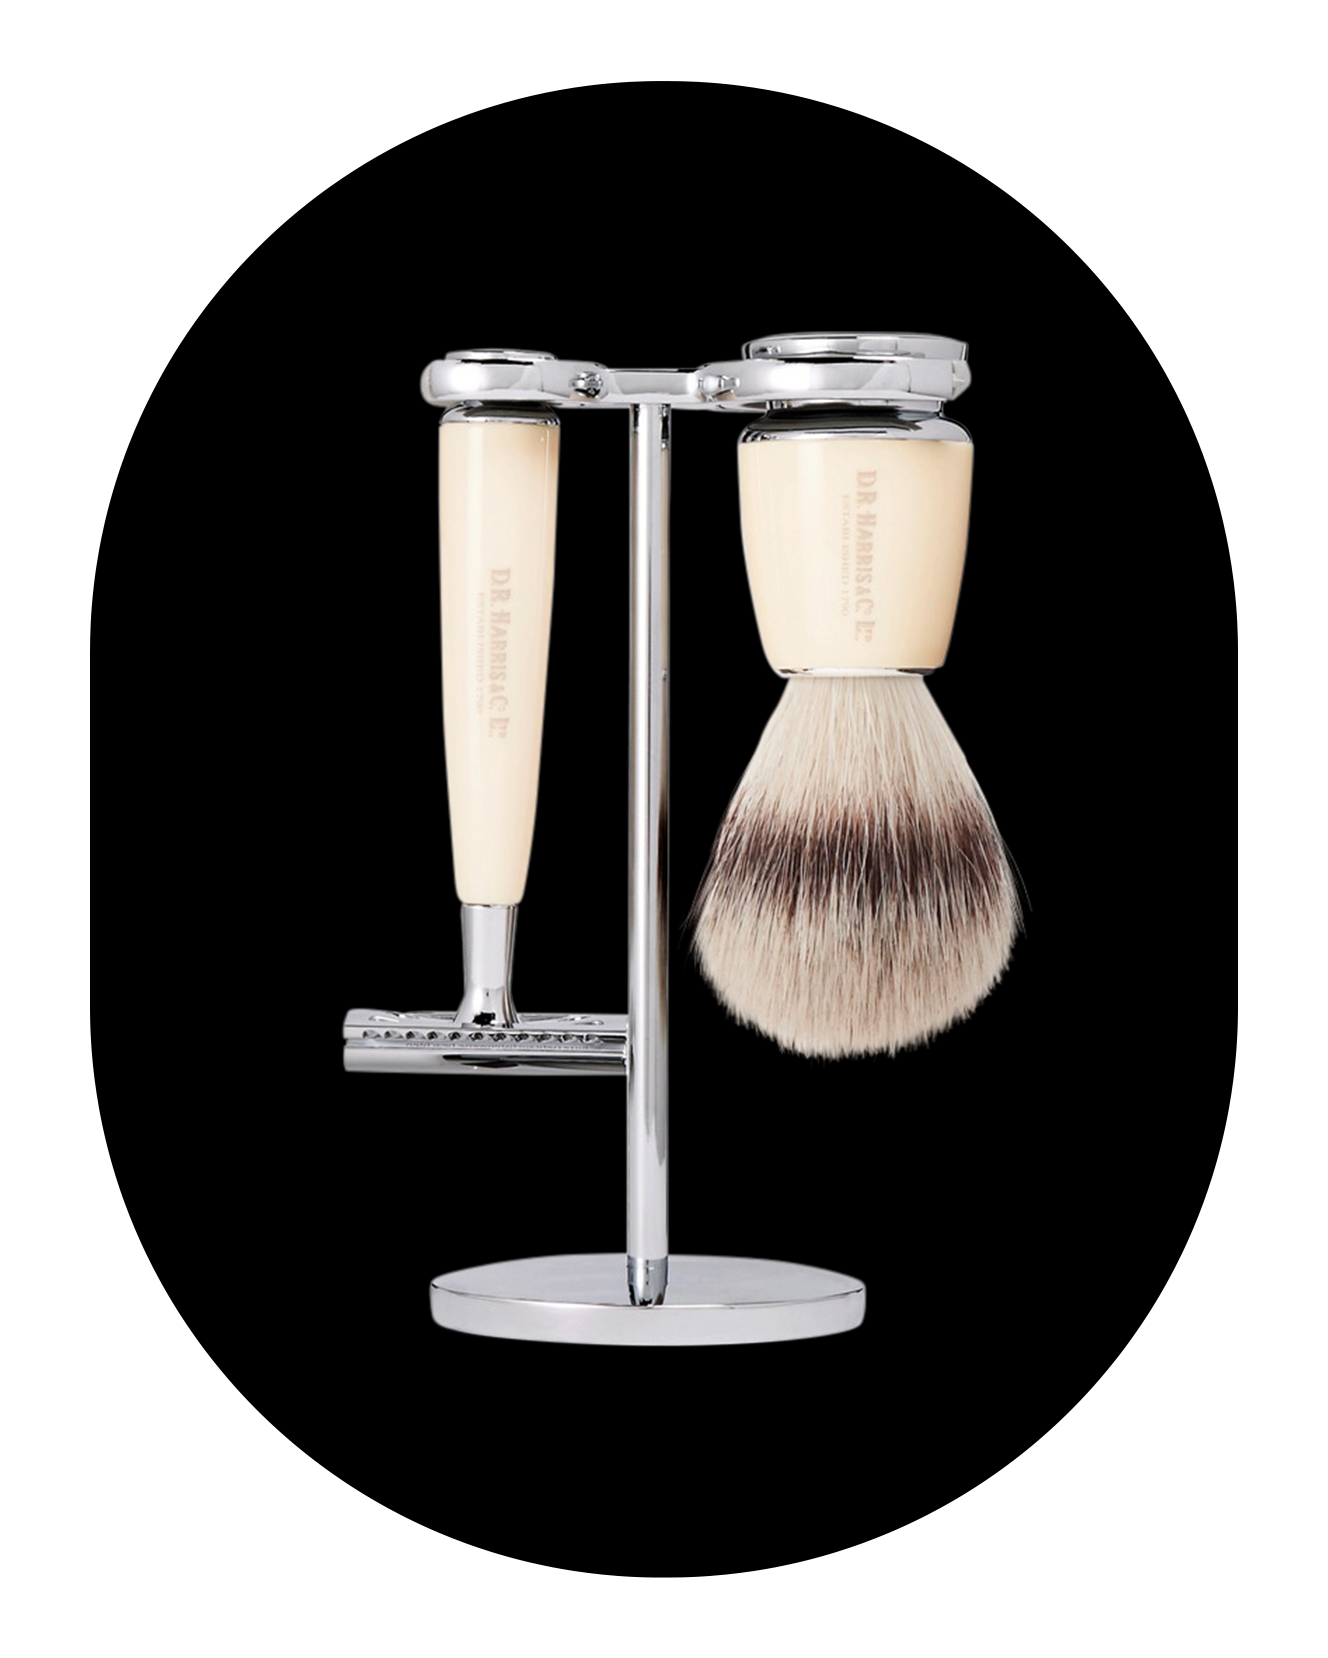 Safety Chrome and Resin Three-Piece Shaving Set